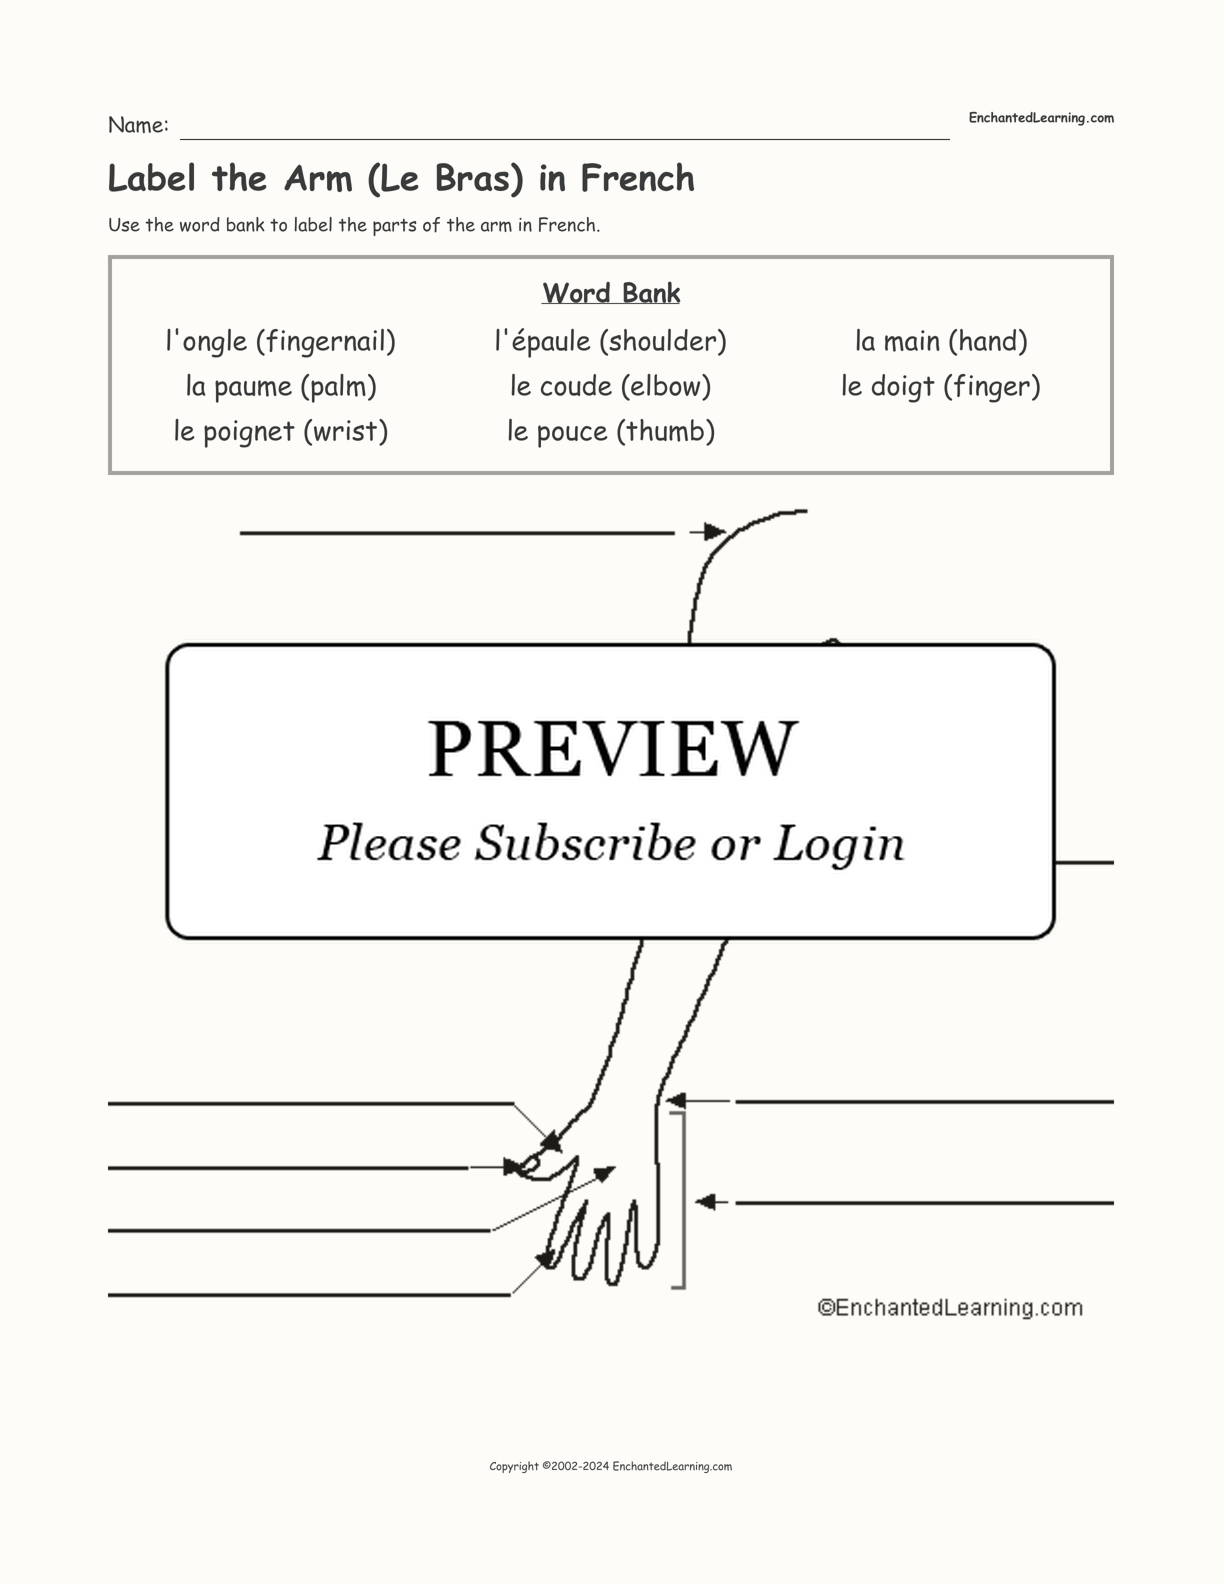 Label the Arm (Le Bras) in French interactive worksheet page 1